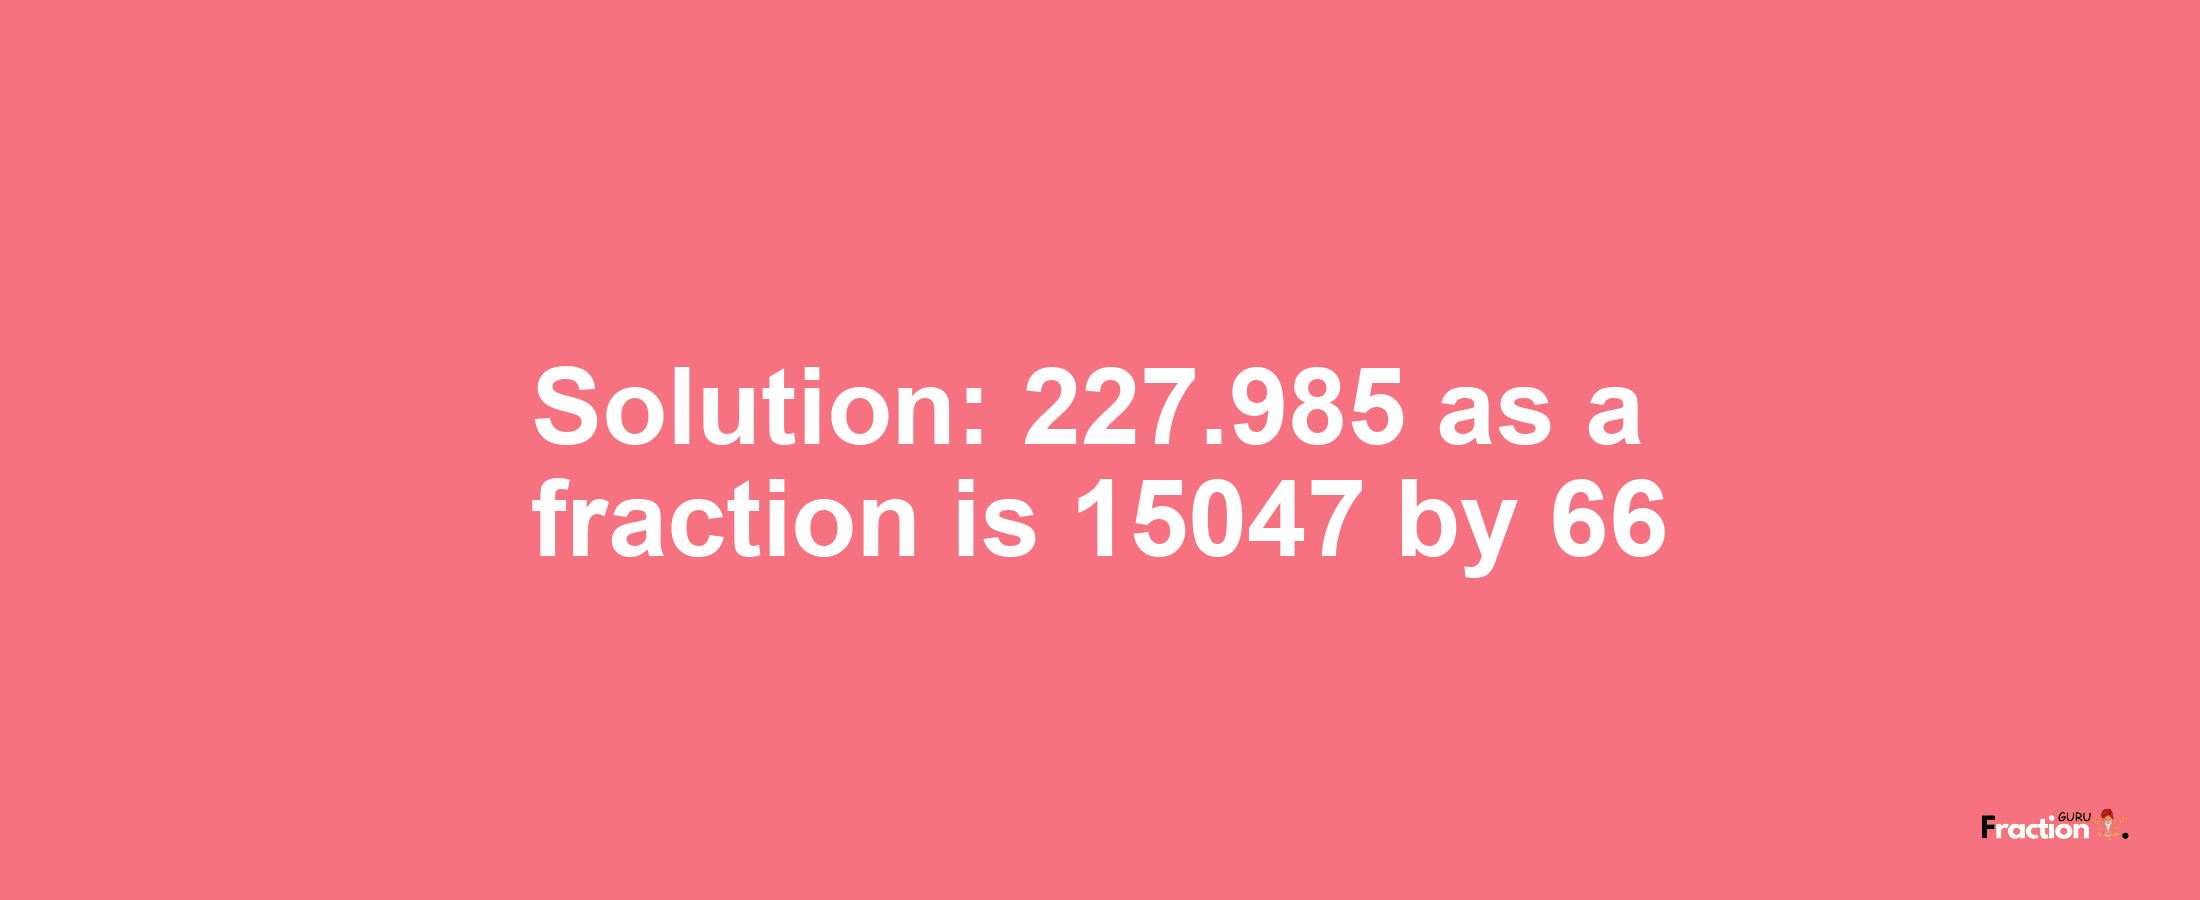 Solution:227.985 as a fraction is 15047/66